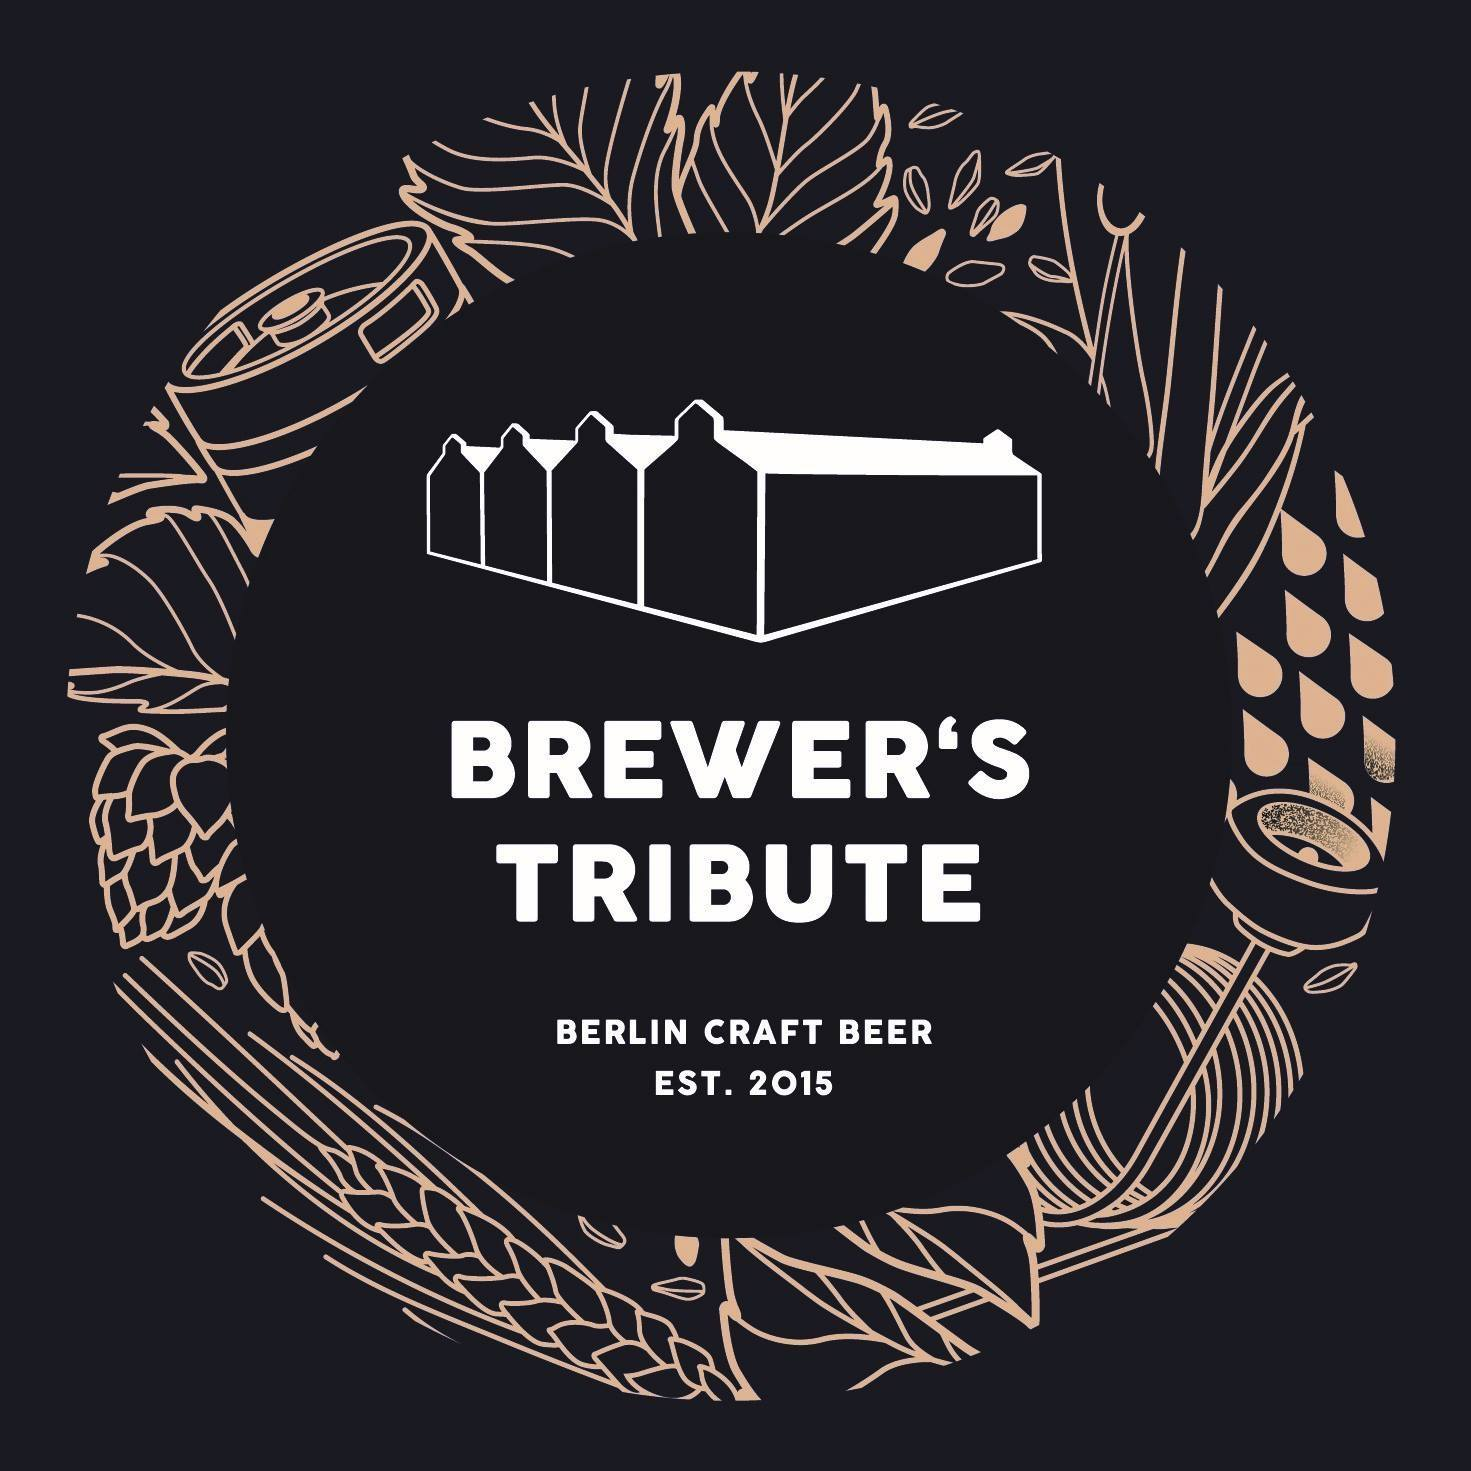 Brewer's Tribute